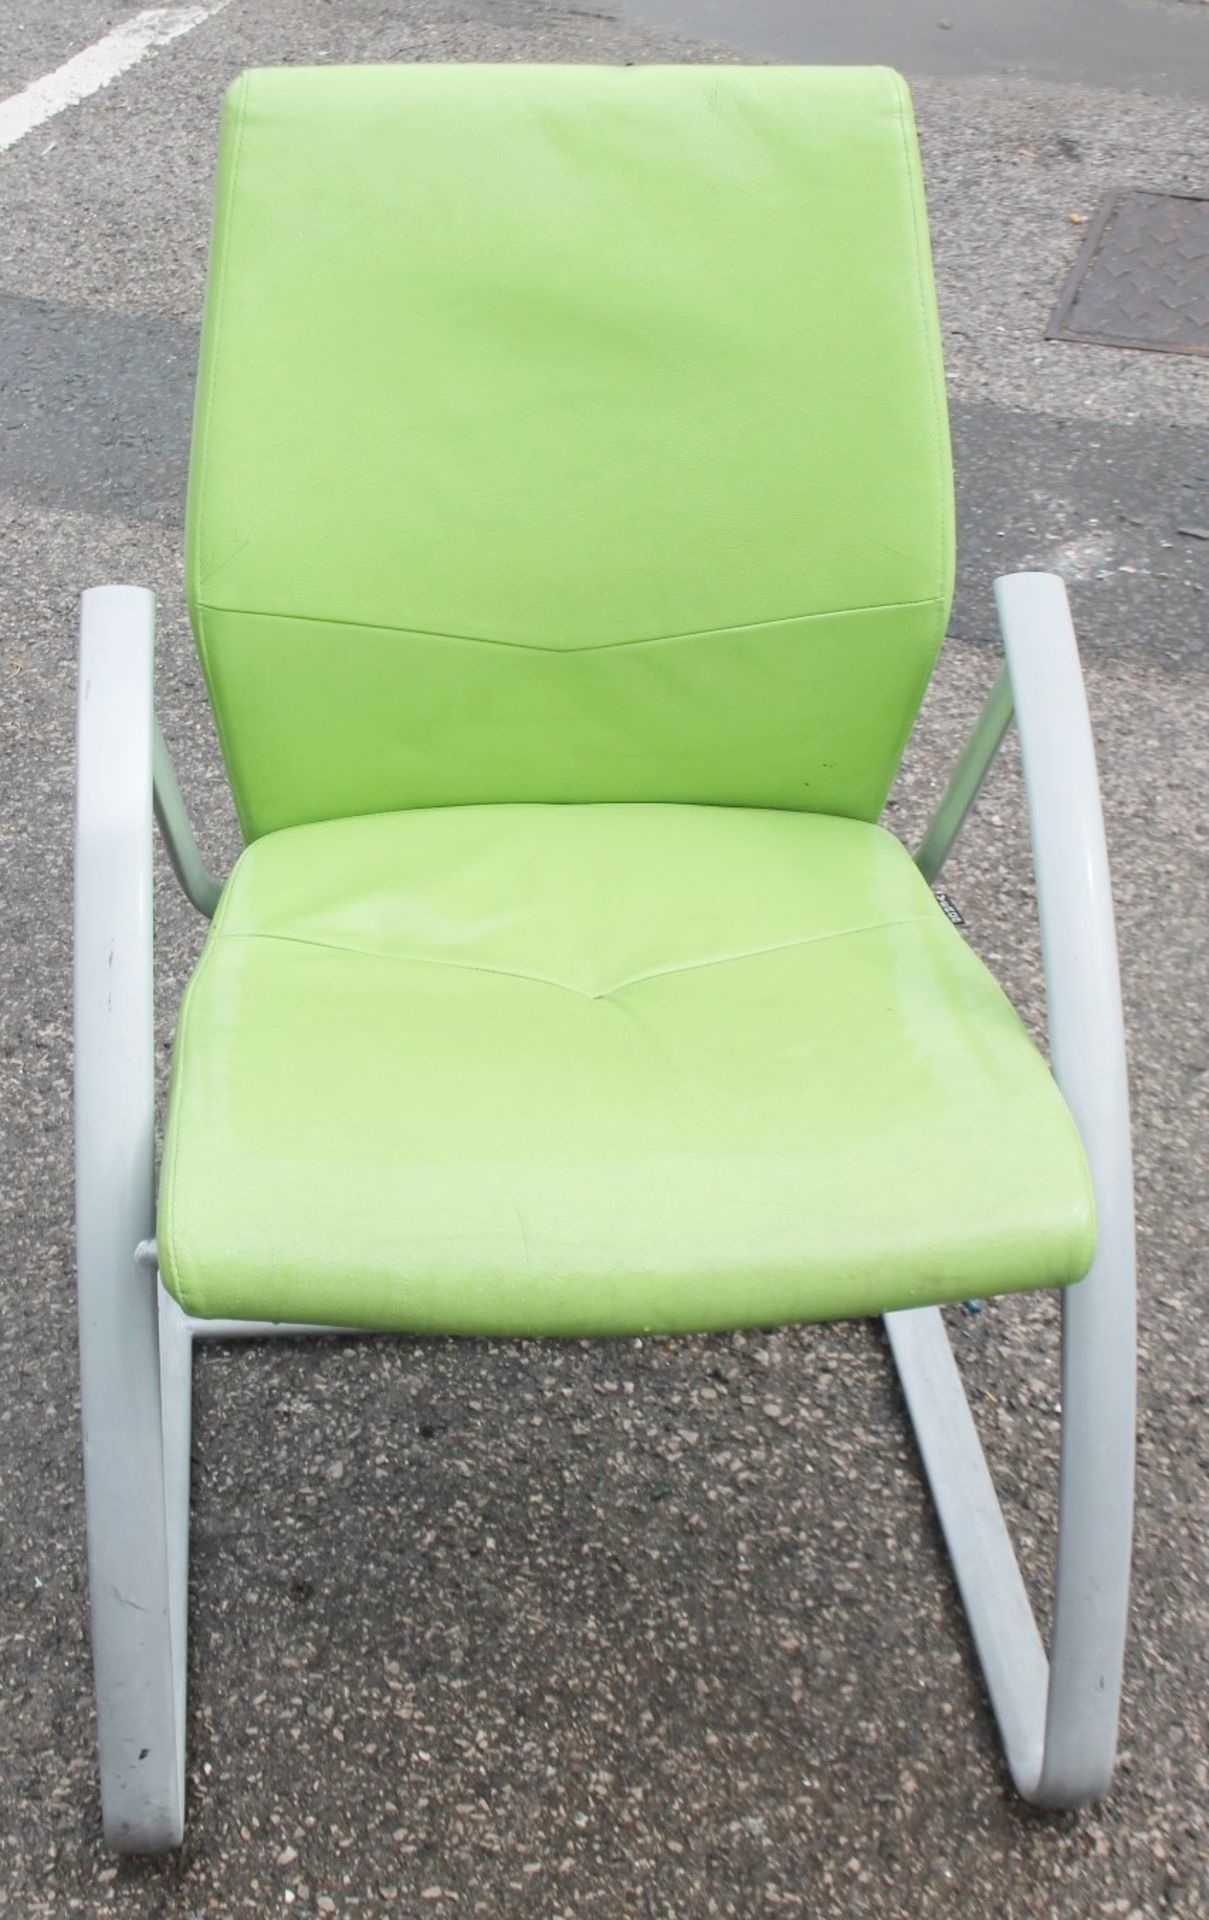 1 x VERCO Branded Cantilever Chair Upholstered In A Lime Faux Leather - Removed From An Executive - Image 2 of 5